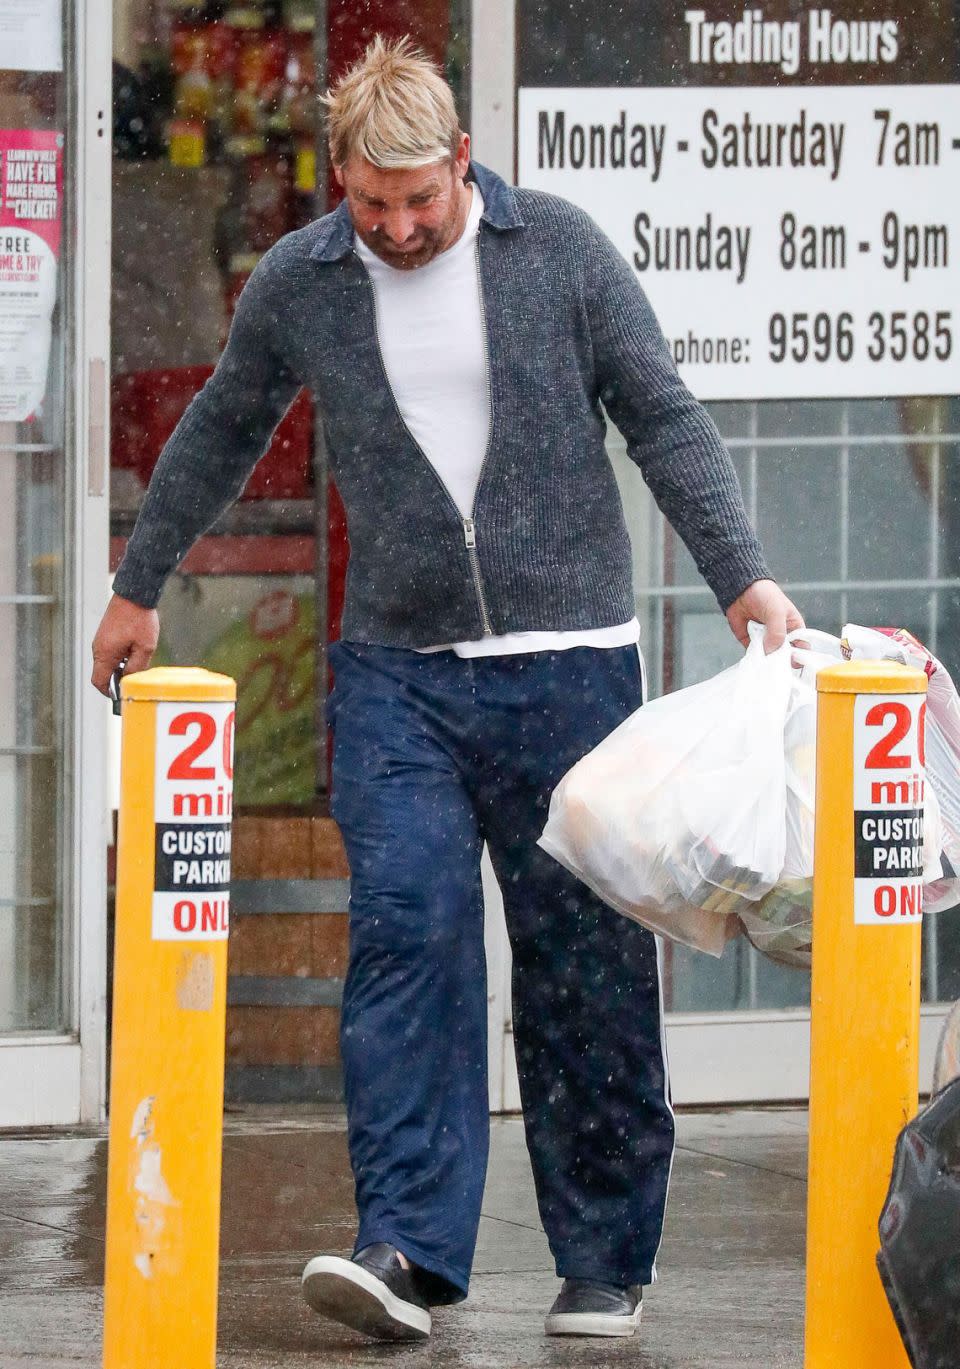 He certainly had his hands full thanks to several bags from the supermarket. Source: Media Mode